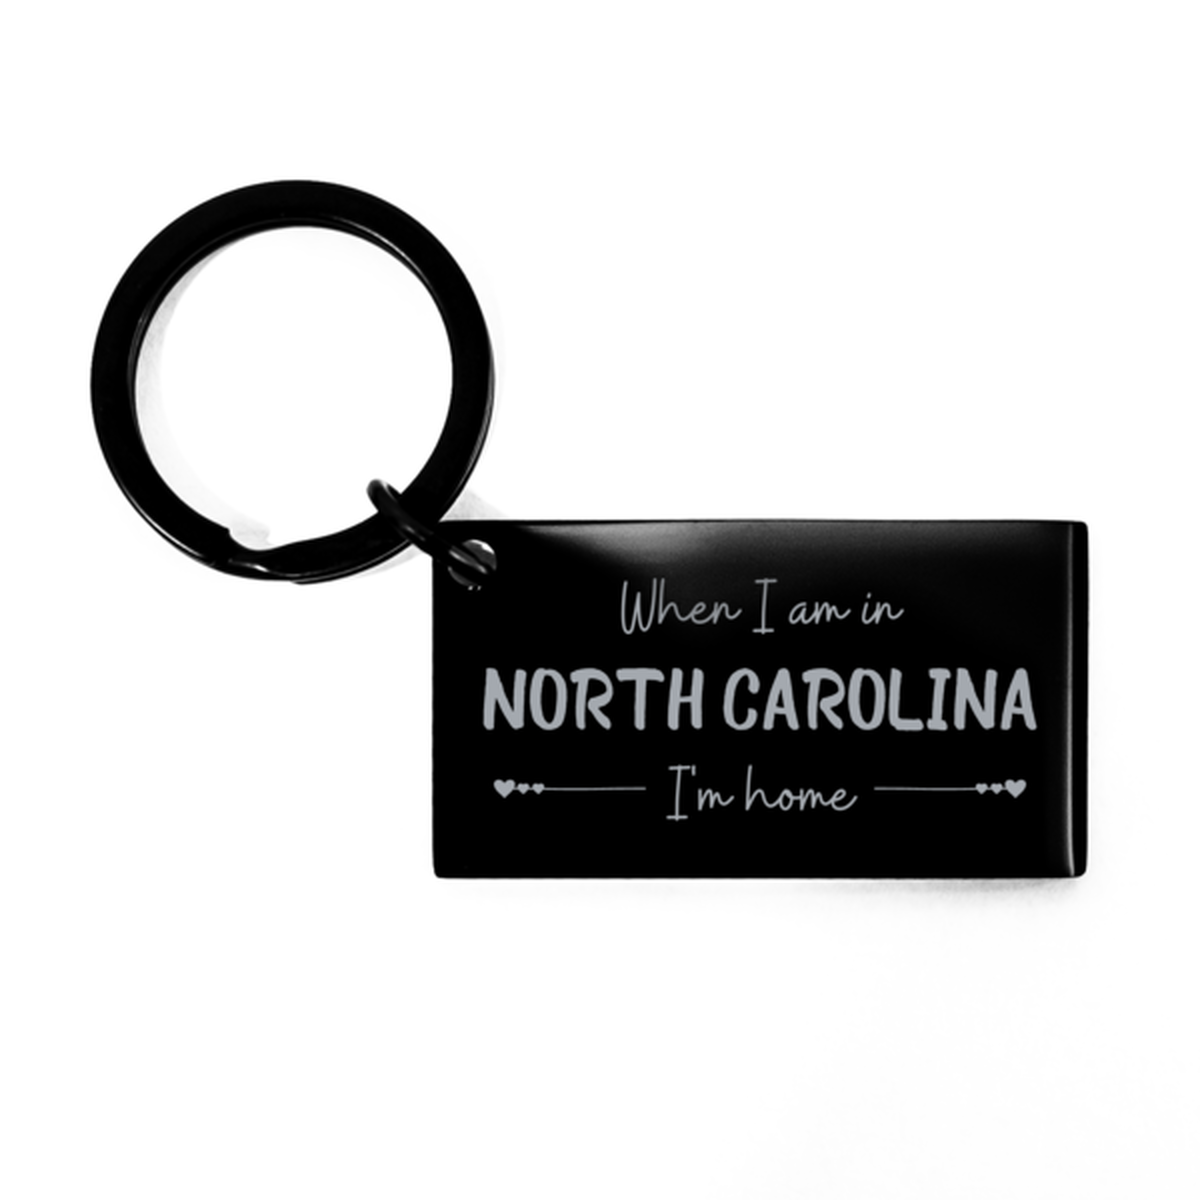 When I am in North Carolina I'm home Keychain, Cheap Gifts For North Carolina, State North Carolina Birthday Gifts for Friends Coworker